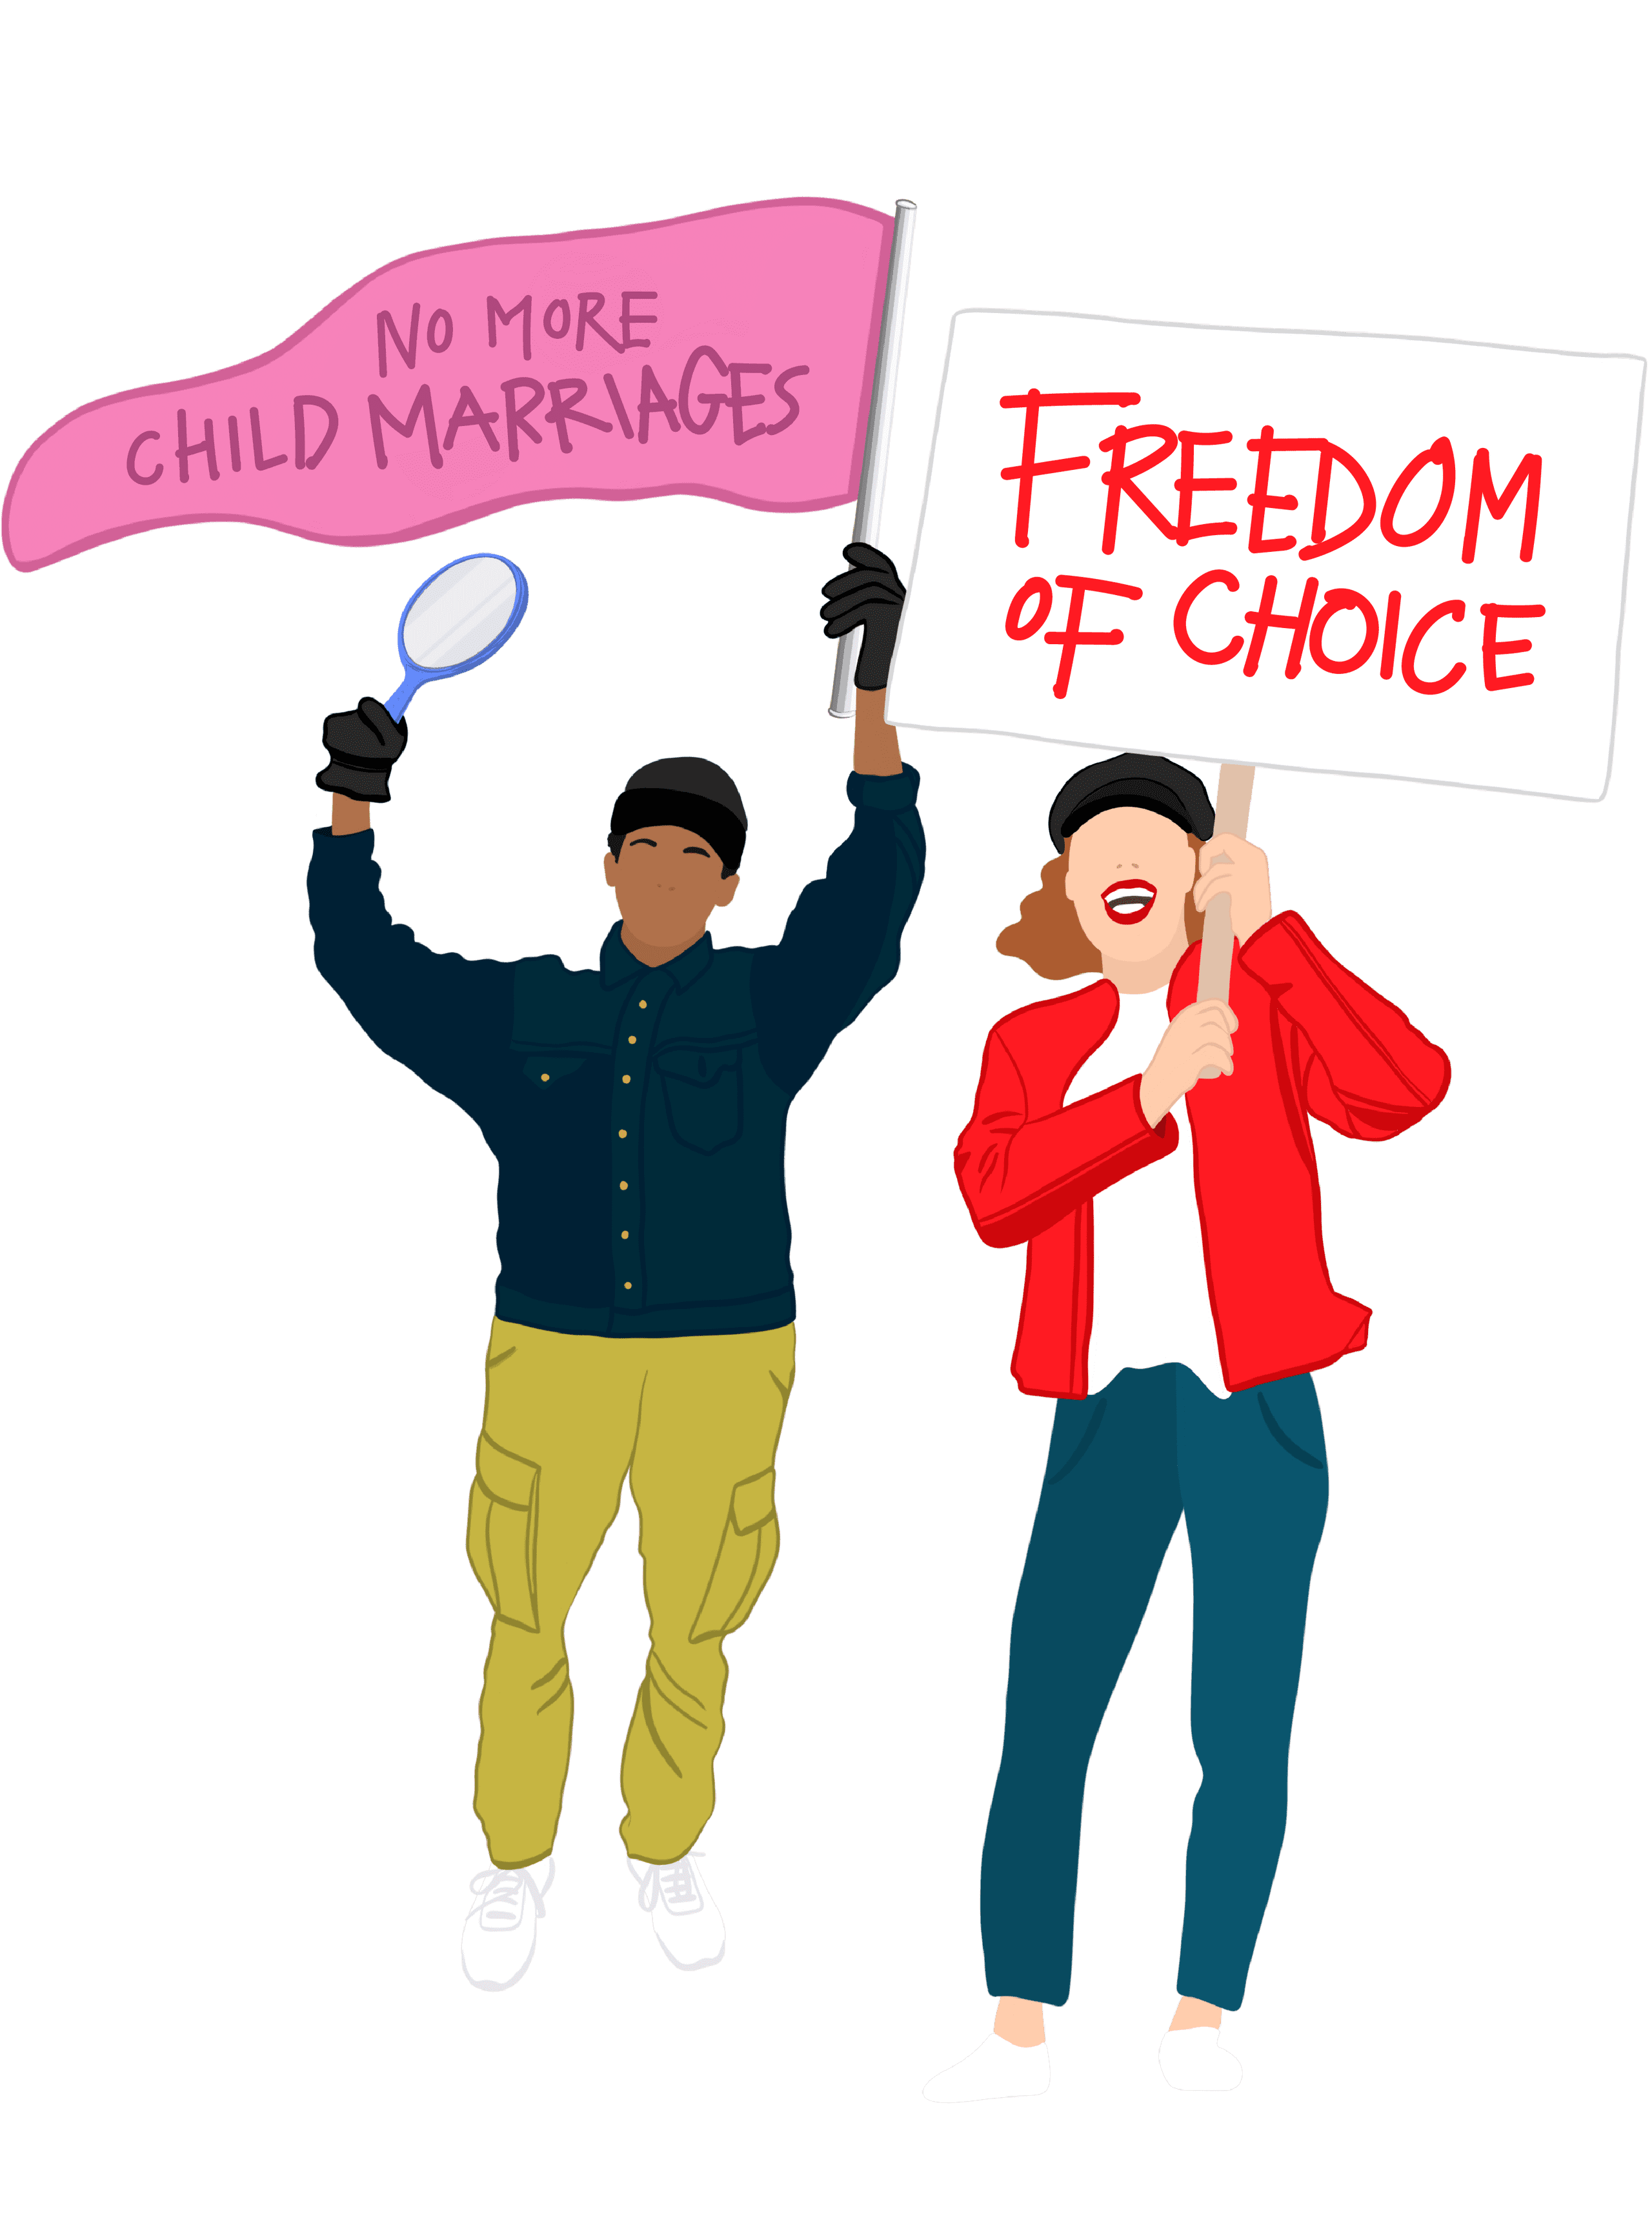 Illustration of two people cheering while holding two signs that says No more child marriages and freedom of choice